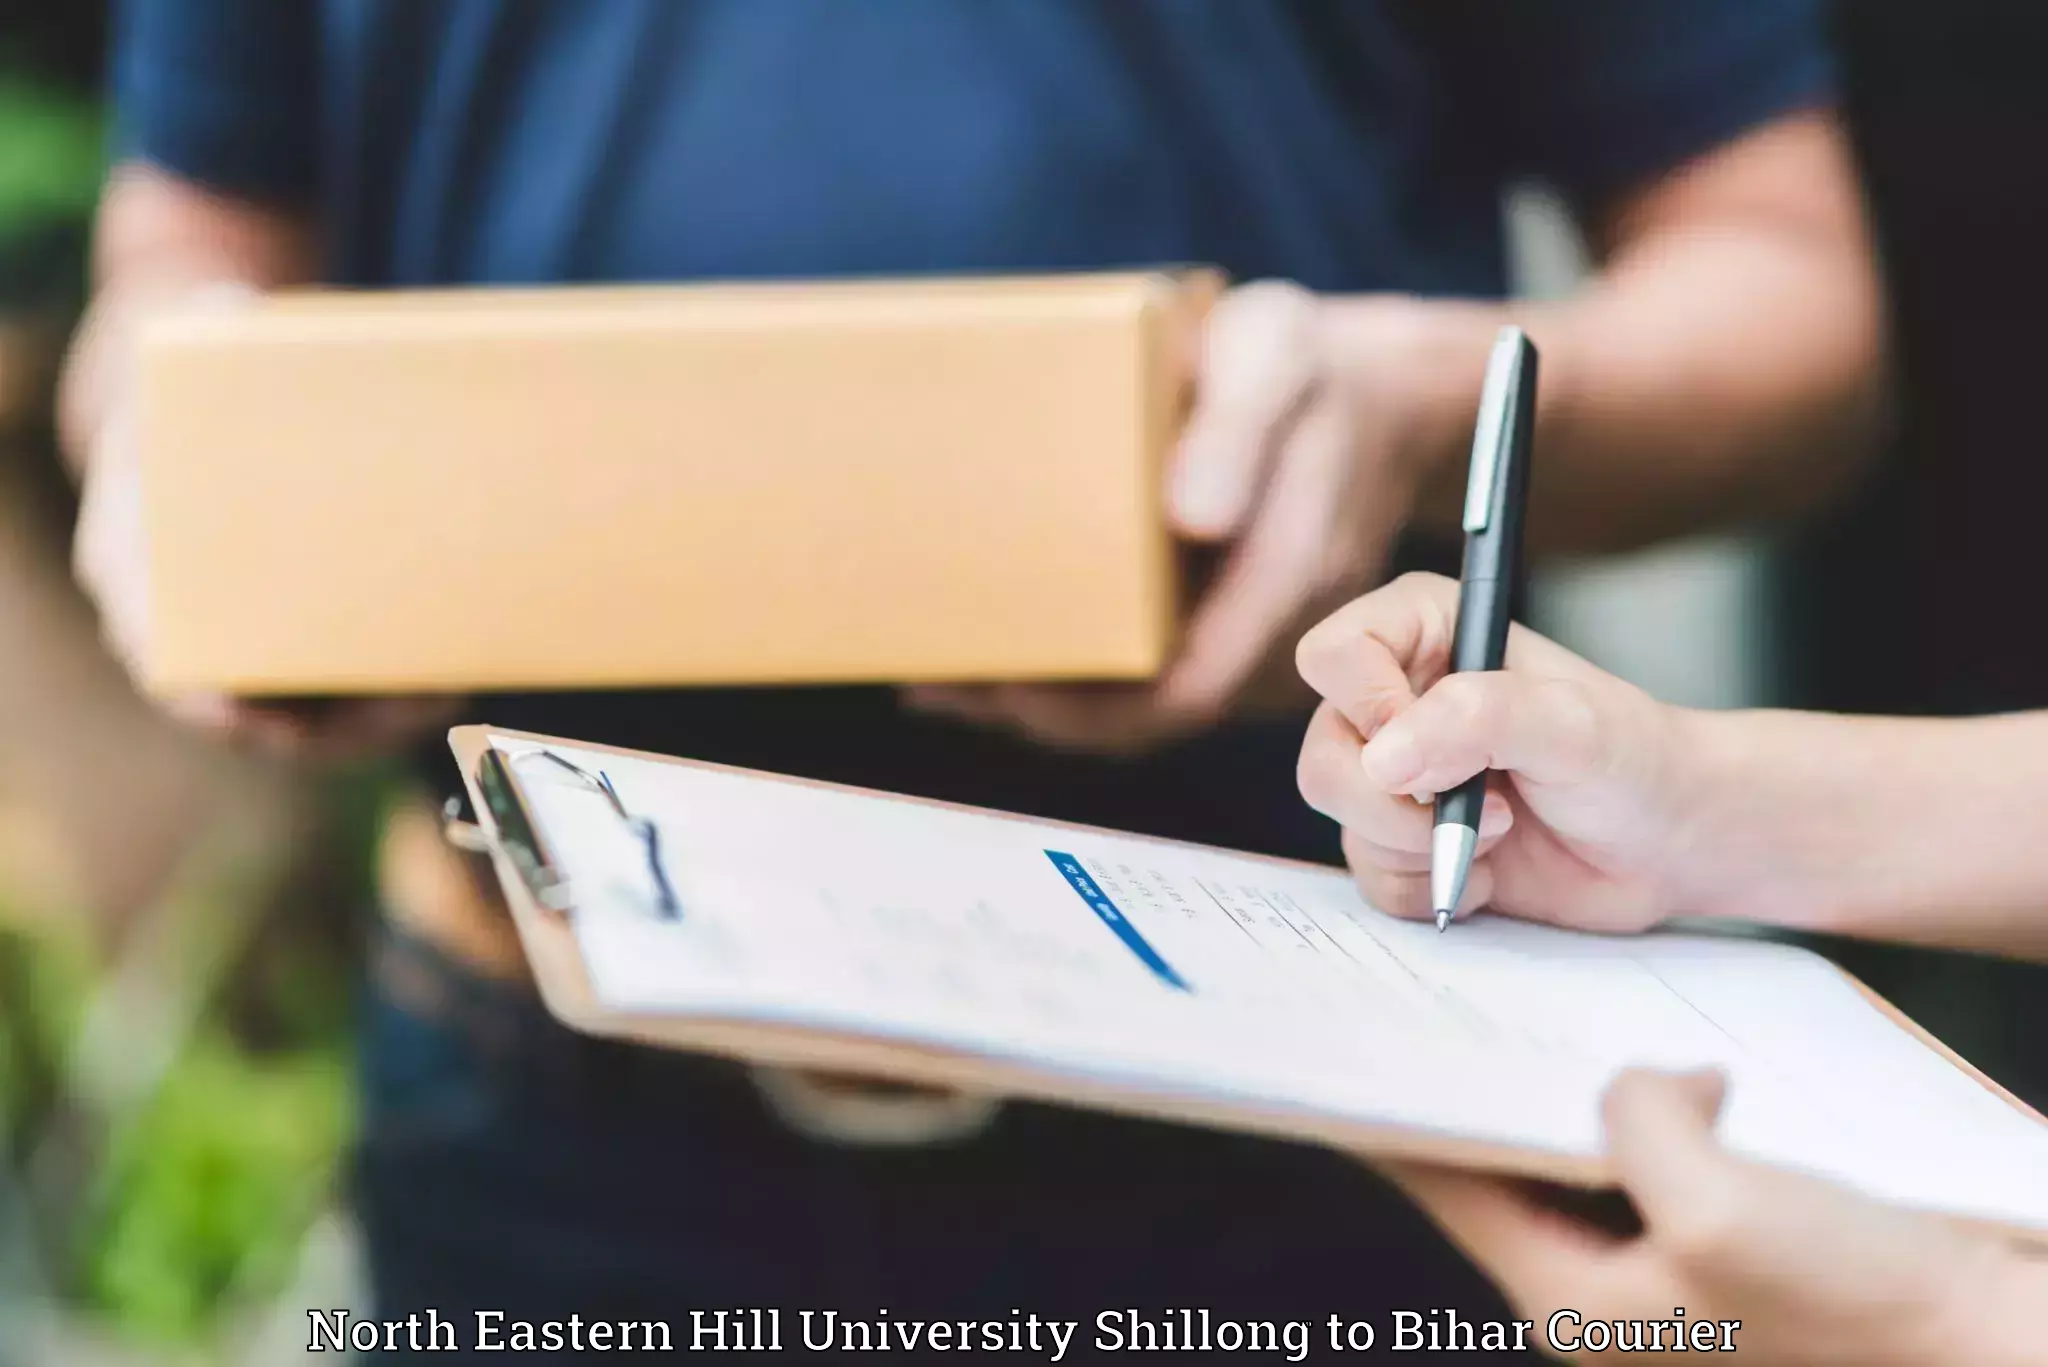 Full-service movers North Eastern Hill University Shillong to Darbhanga